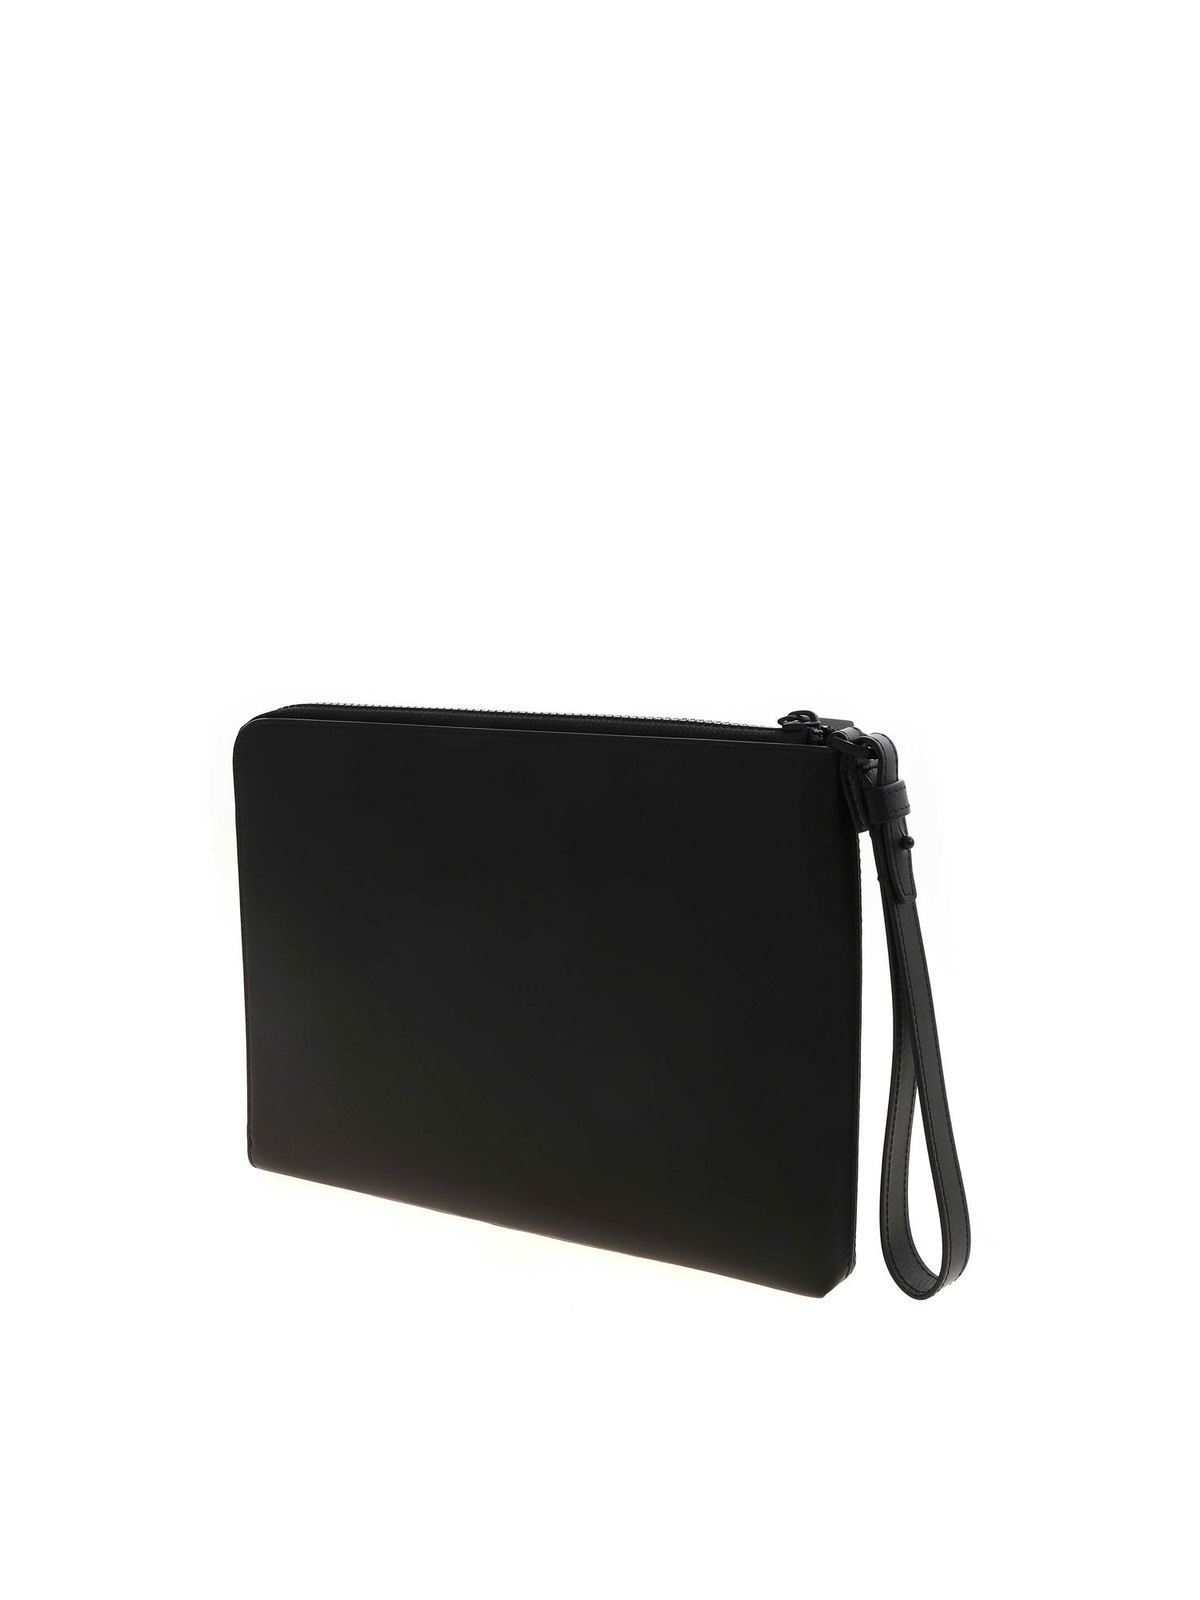 Clutches Montblanc - Extreme 2.0 clutch bag - 128610